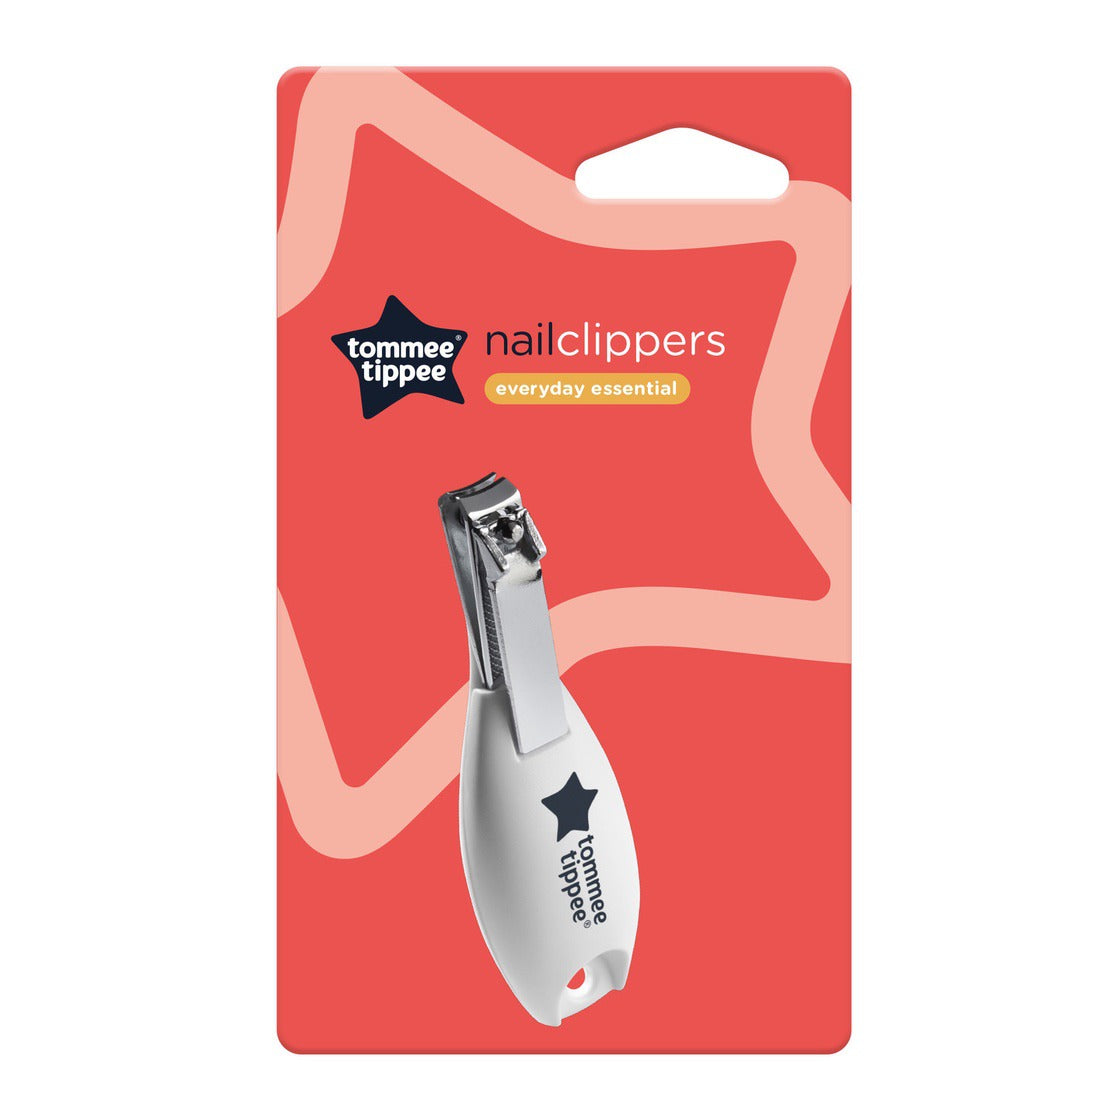 Buy Electric Baby Nail Trimmer at the Best Price in Pakistan